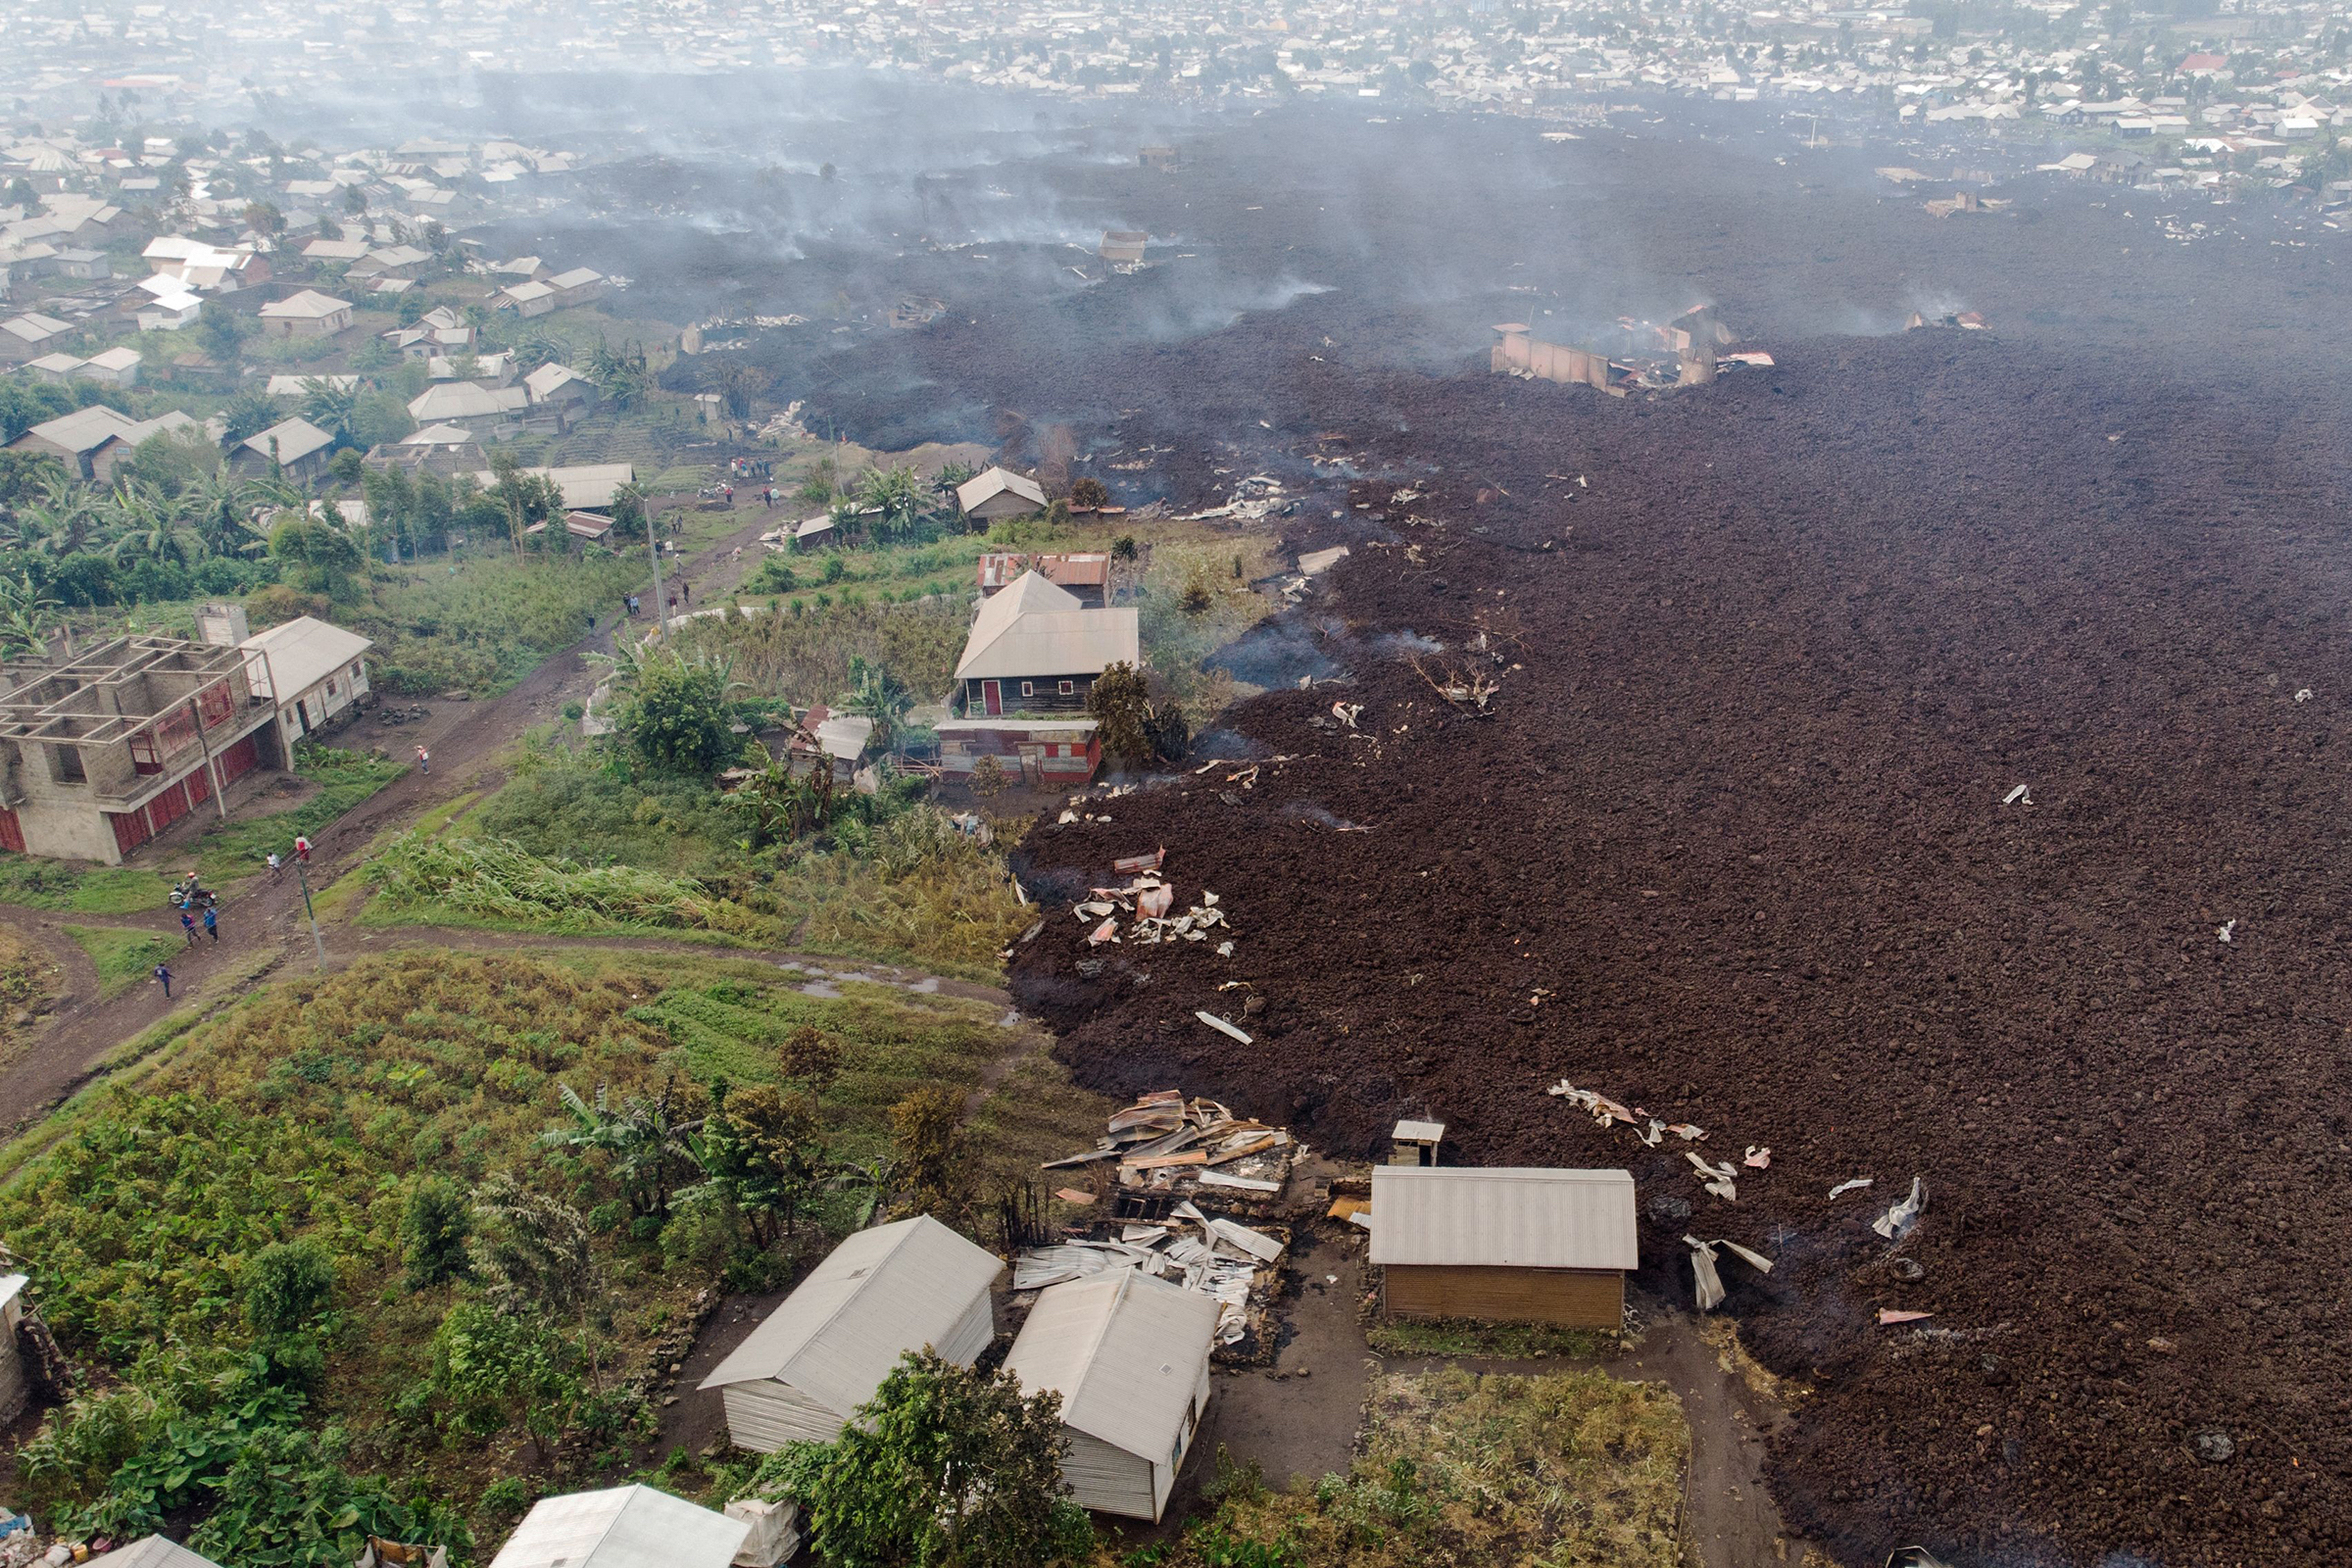 An aerial view shows debris engulfing buildings in Bushara village, near Goma, on May 23, after a volcanic eruption of Mount Nyiragongo that sent thousands of residents fleeing during the night in eastern Democratic Republic of Congo. The river of boiling lava came to a halt outside Goma; five people died in related accidents.